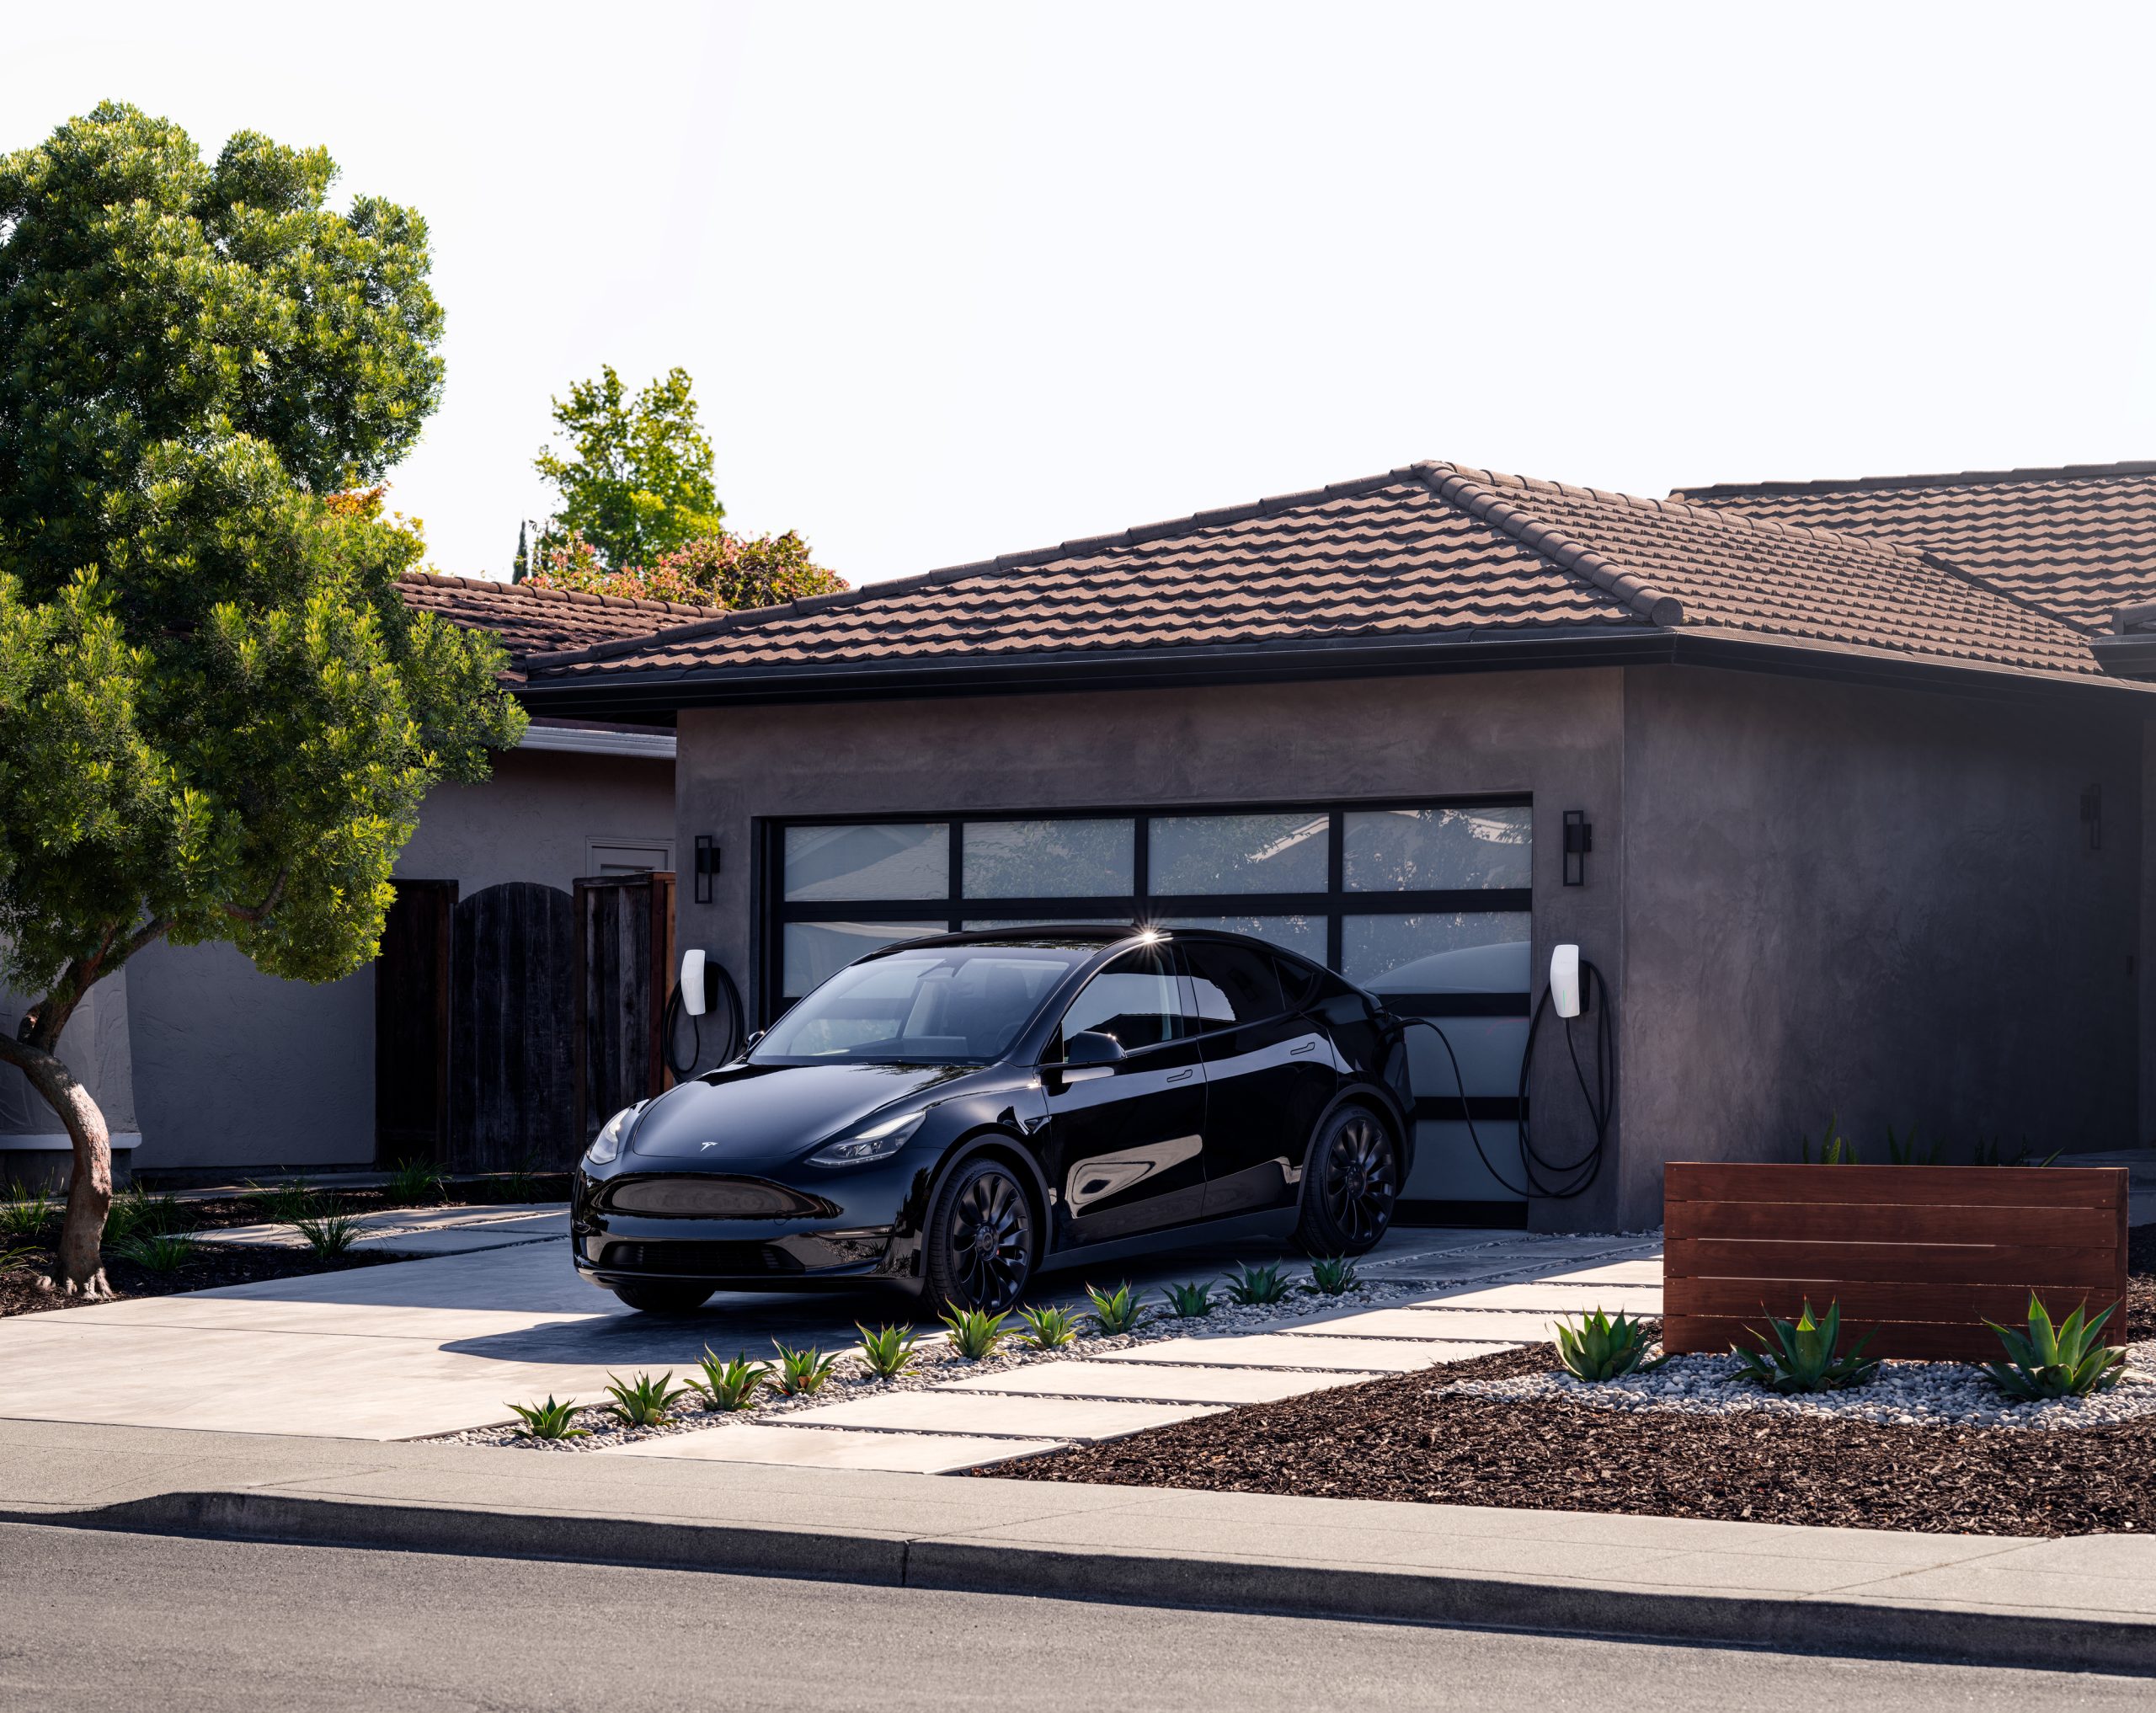 Image of a Tesla Car charging at an all electric home